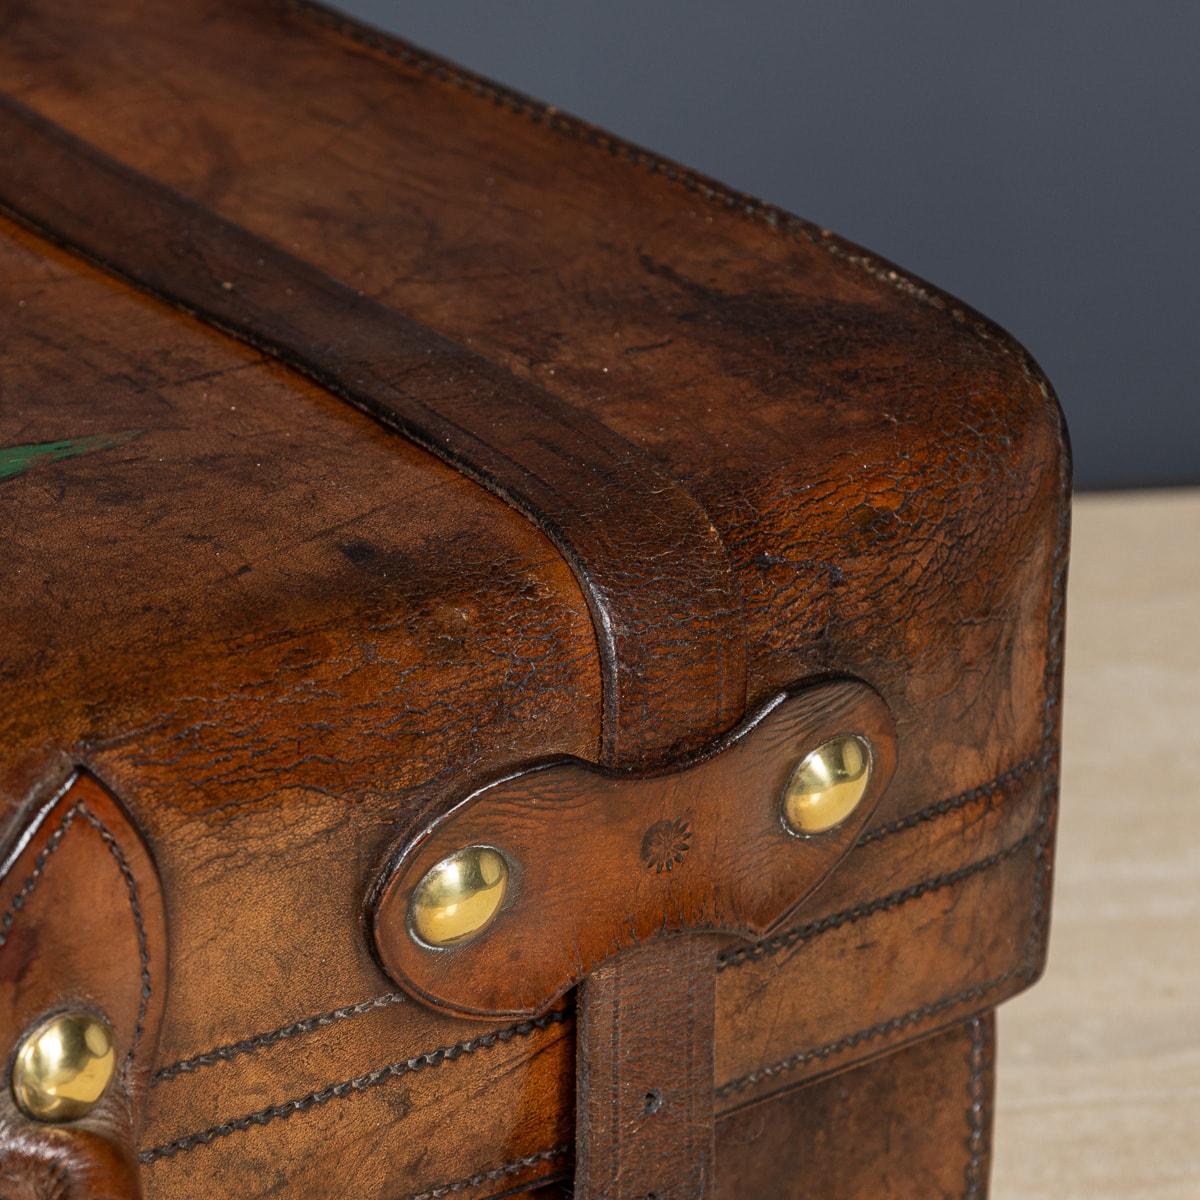 Antique 19th Century Victorian Leather Suitcase With Painted Crest c.1850 For Sale 11